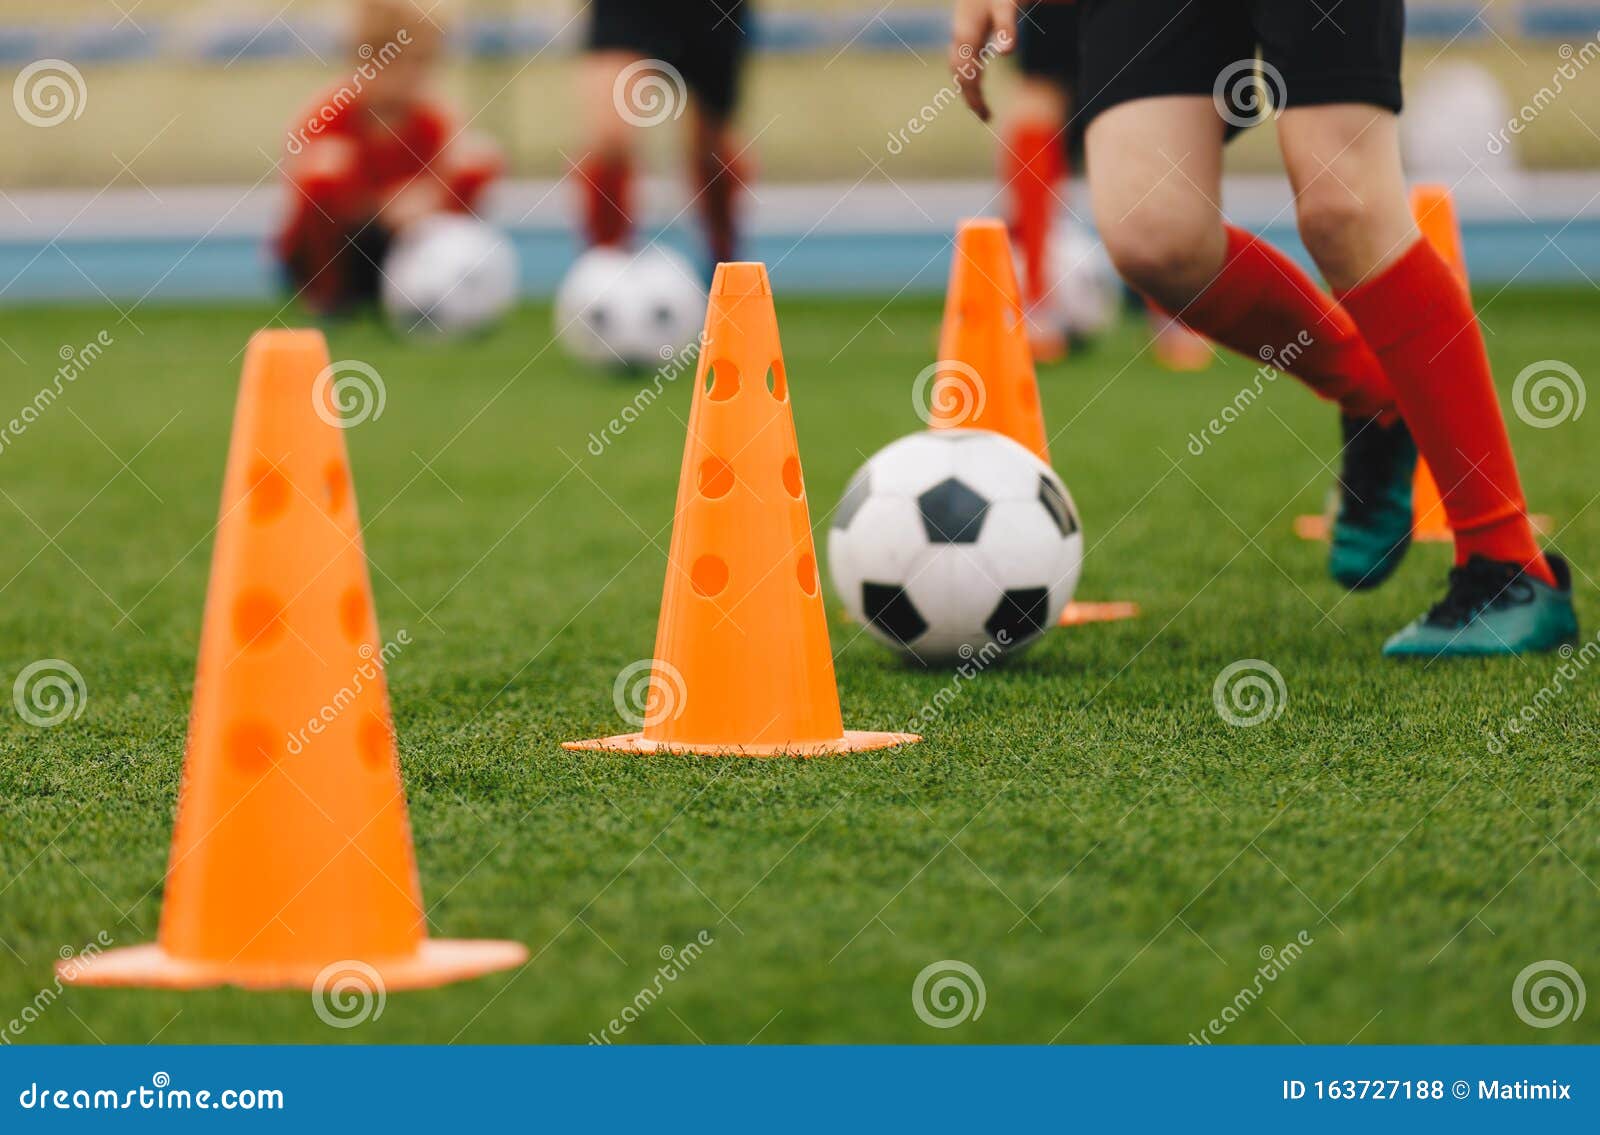 Soccer Training Drill Football Player Running With Ball Soccer Athletes Participate In Soccer Practice Drills Stock Photo Image Of Color Adolescence